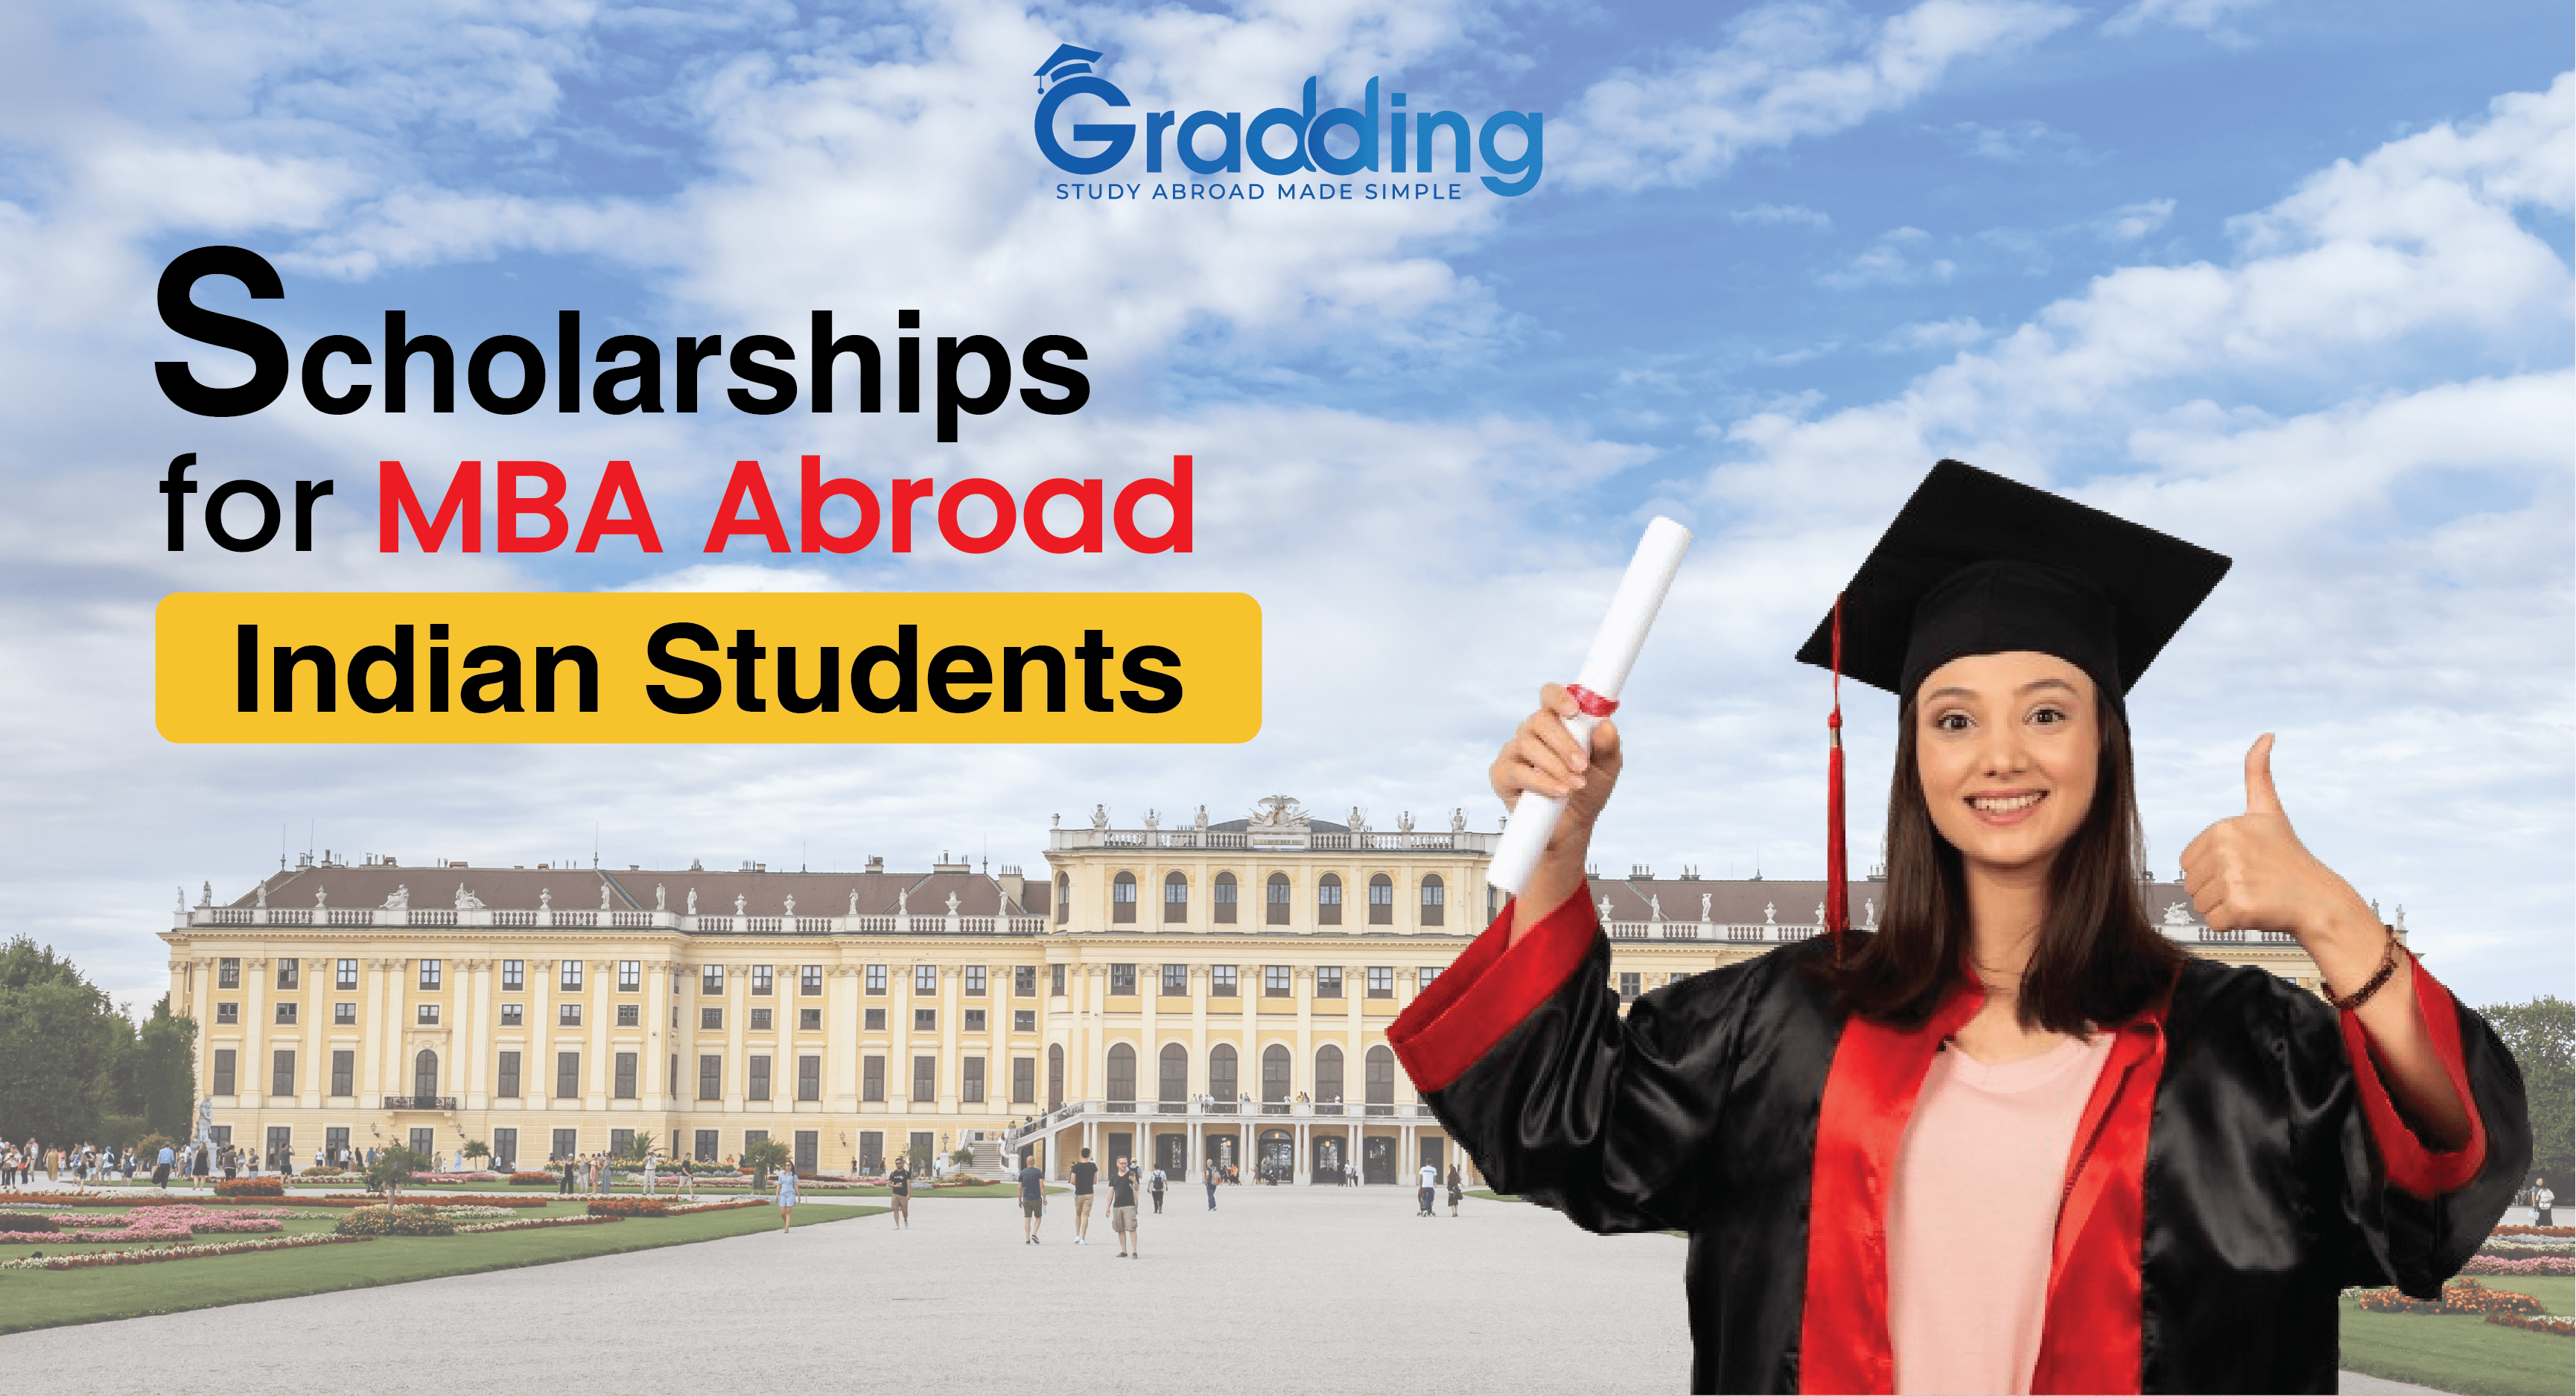 Learn Scholarships for MBA Abroad with Gradding.com.